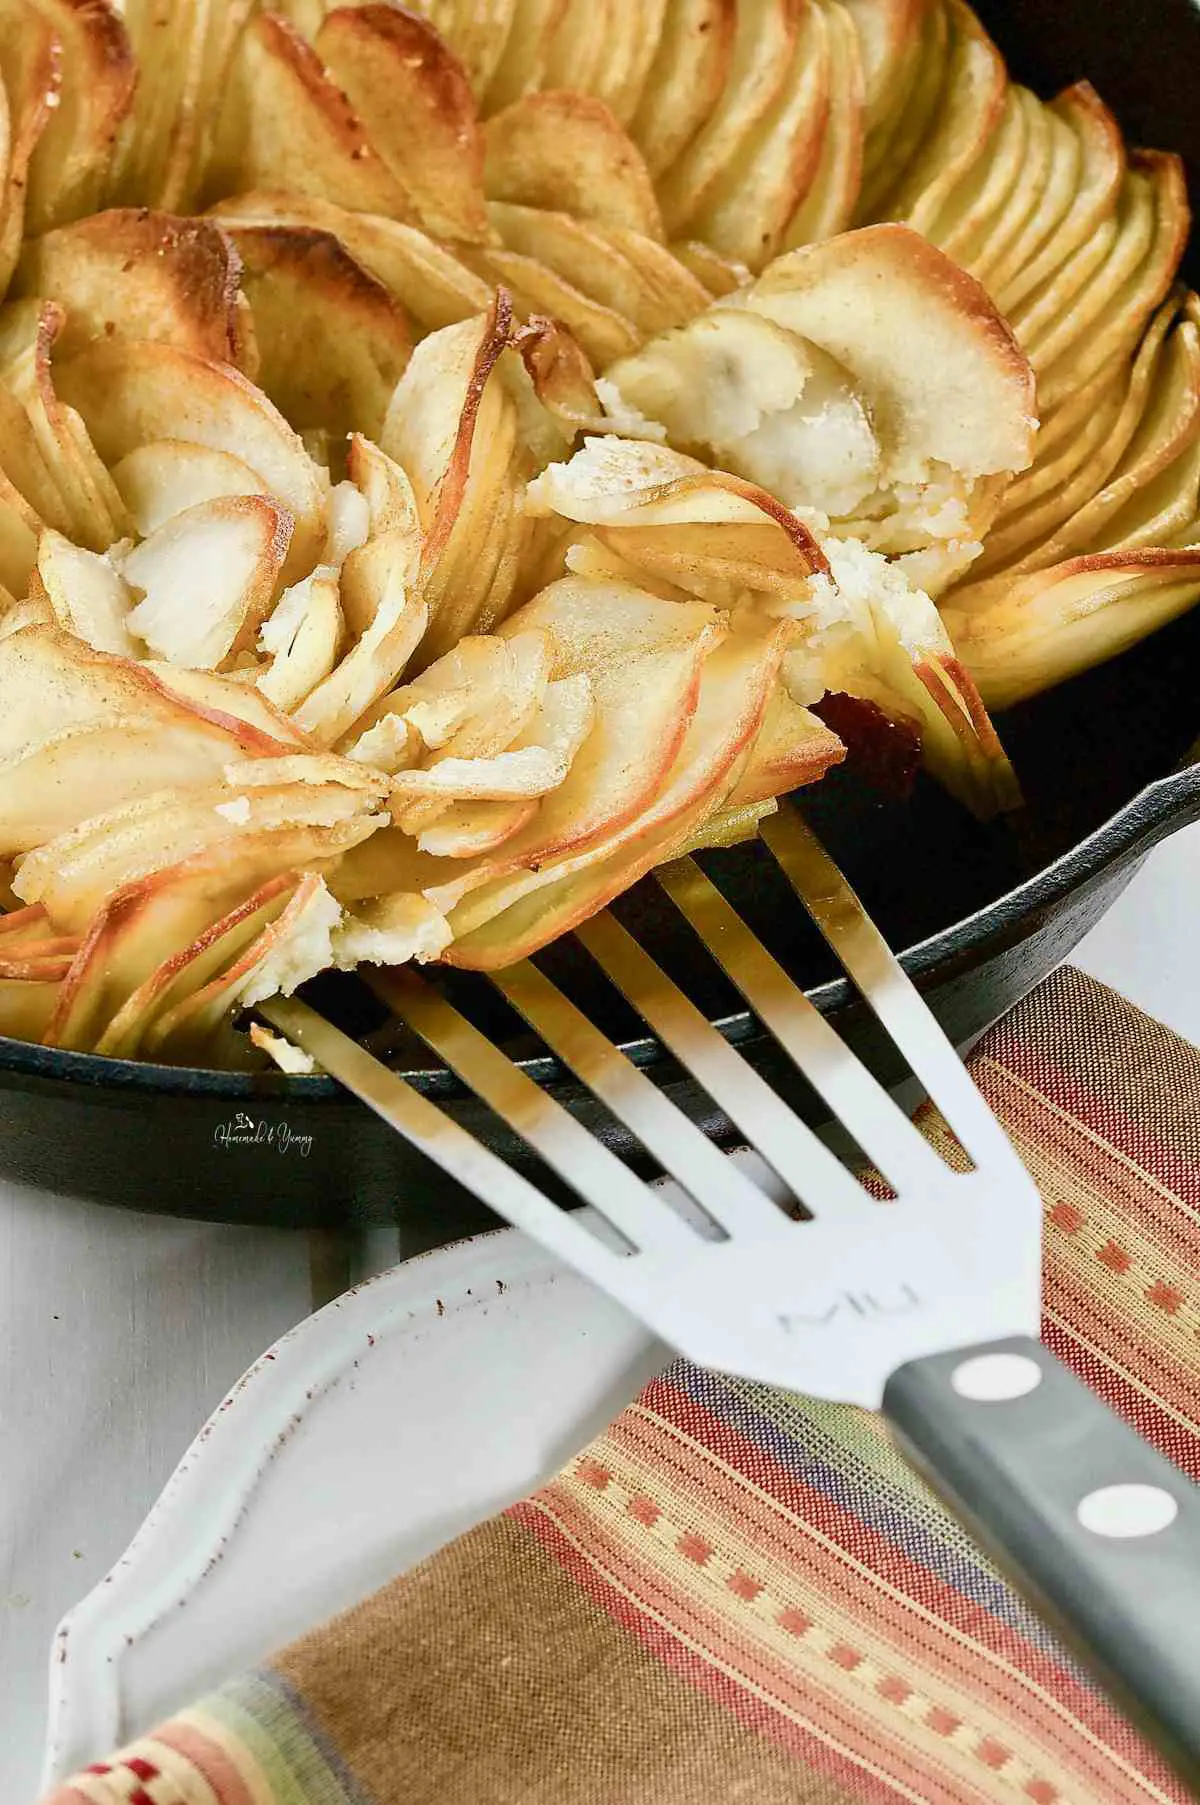 Crispy fried potatoes in a cast iron skillet.